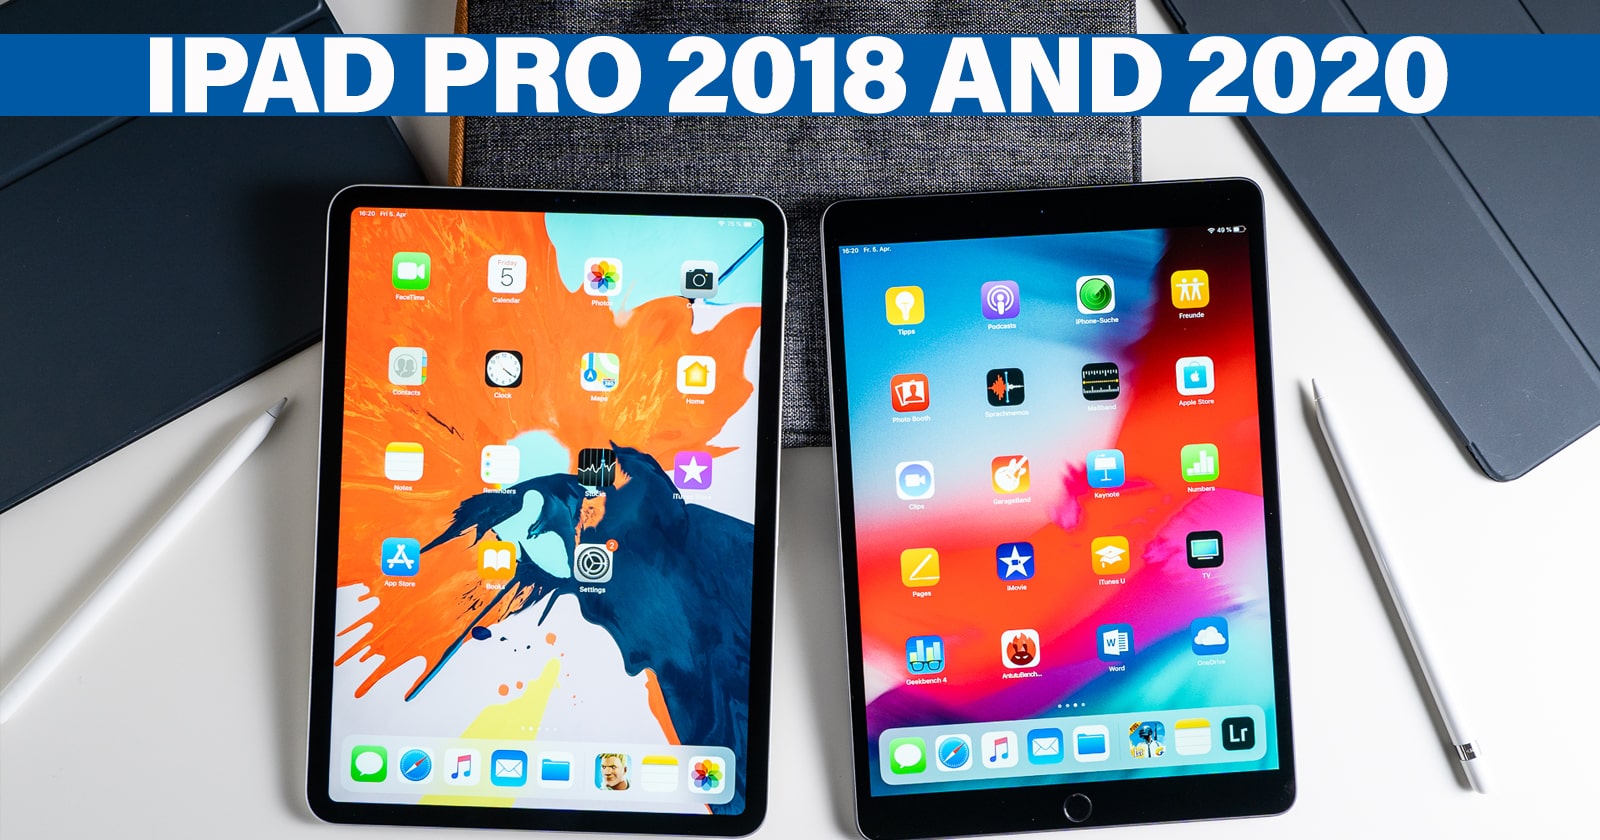 What Is the Difference Between iPad Pro 2018 and 2020?